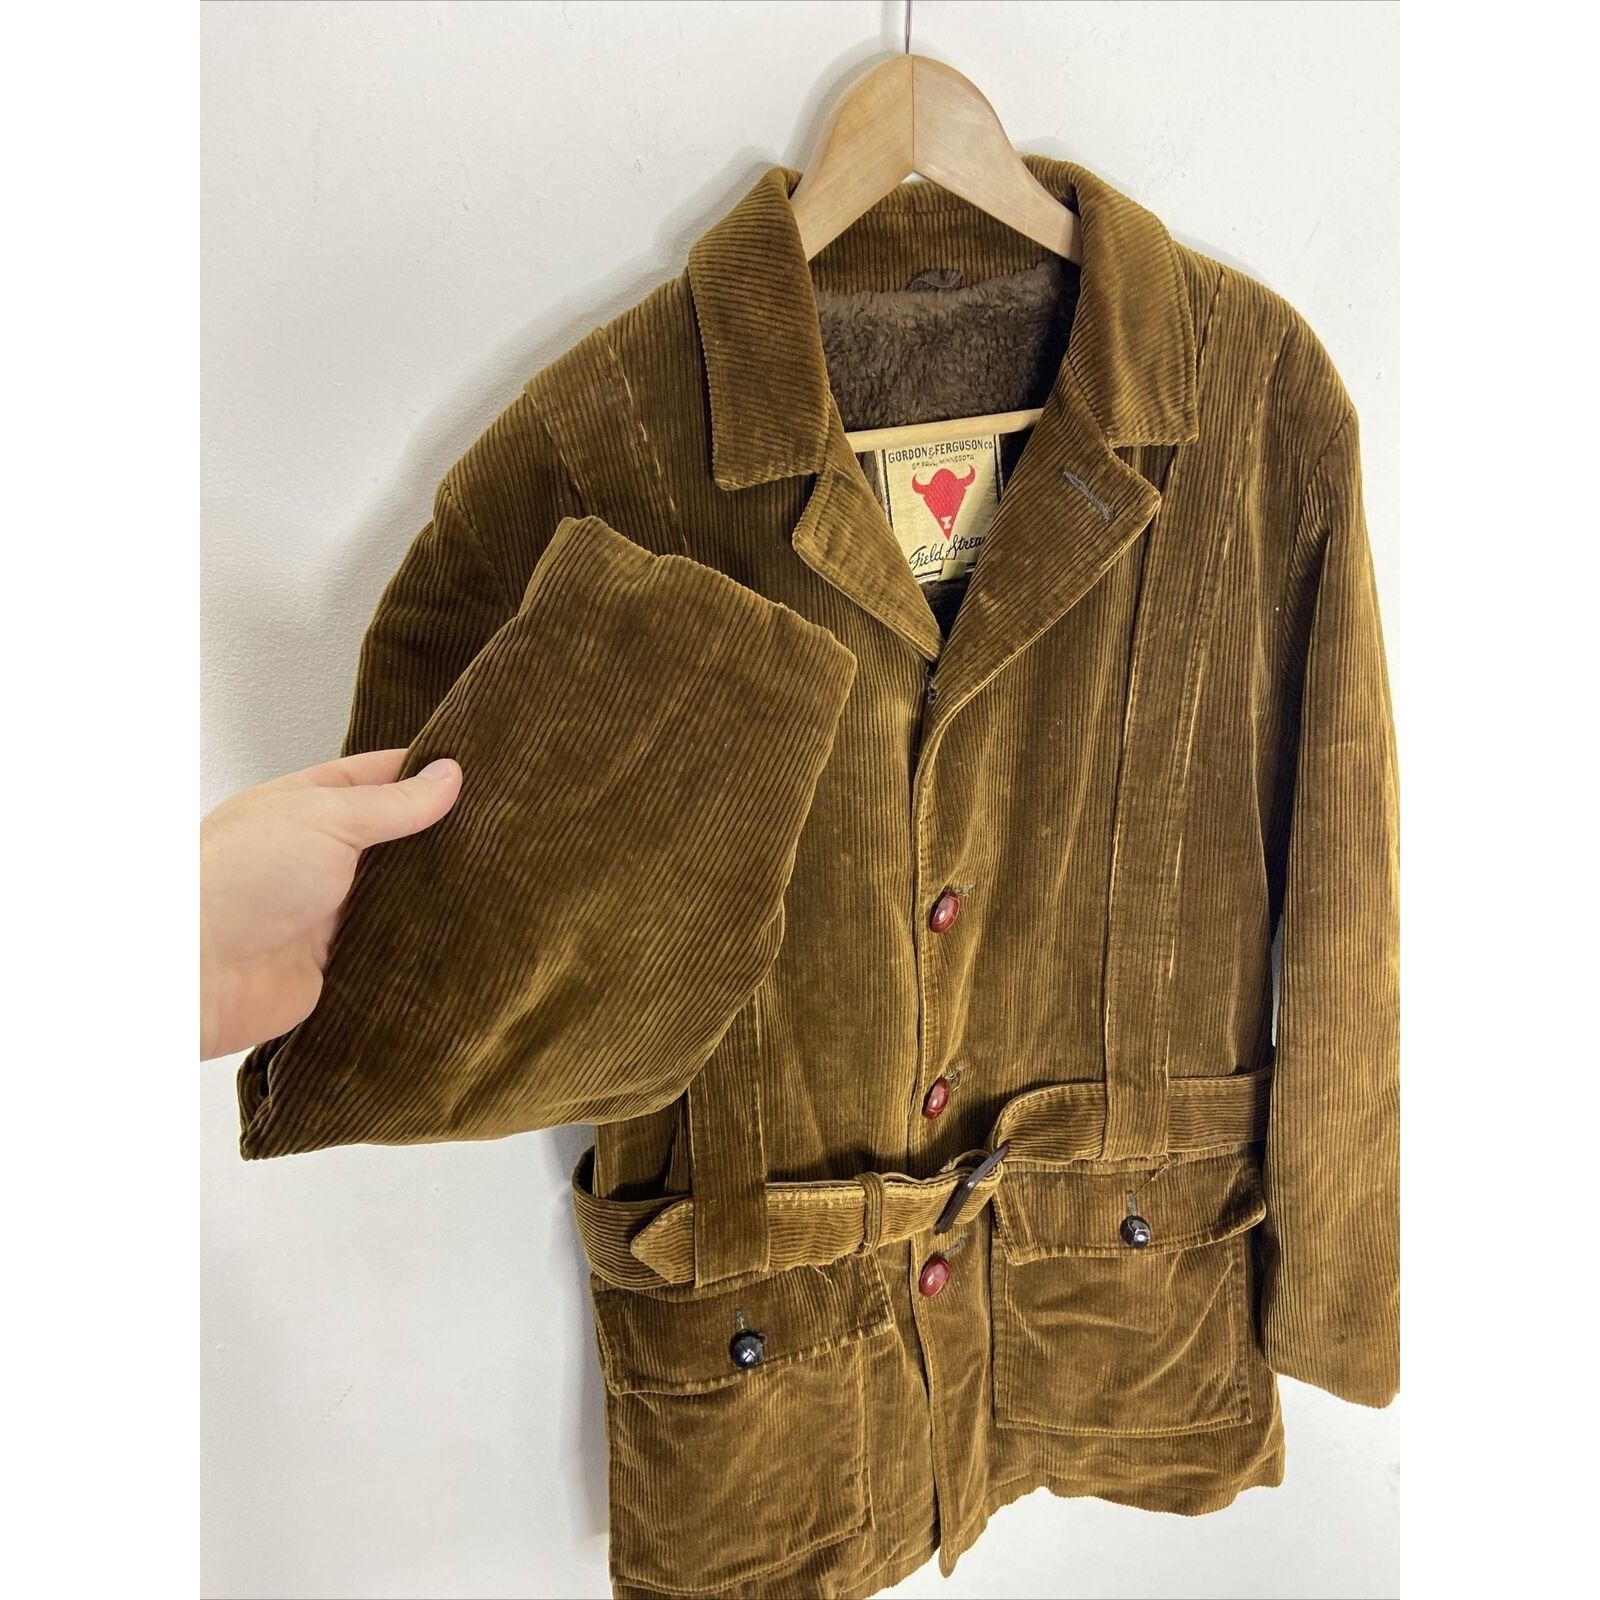 Field And Stream Vintage Field and Stream Men 40 S/M Corduroy Hunting Coat Size US M / EU 48-50 / 2 - 5 Thumbnail